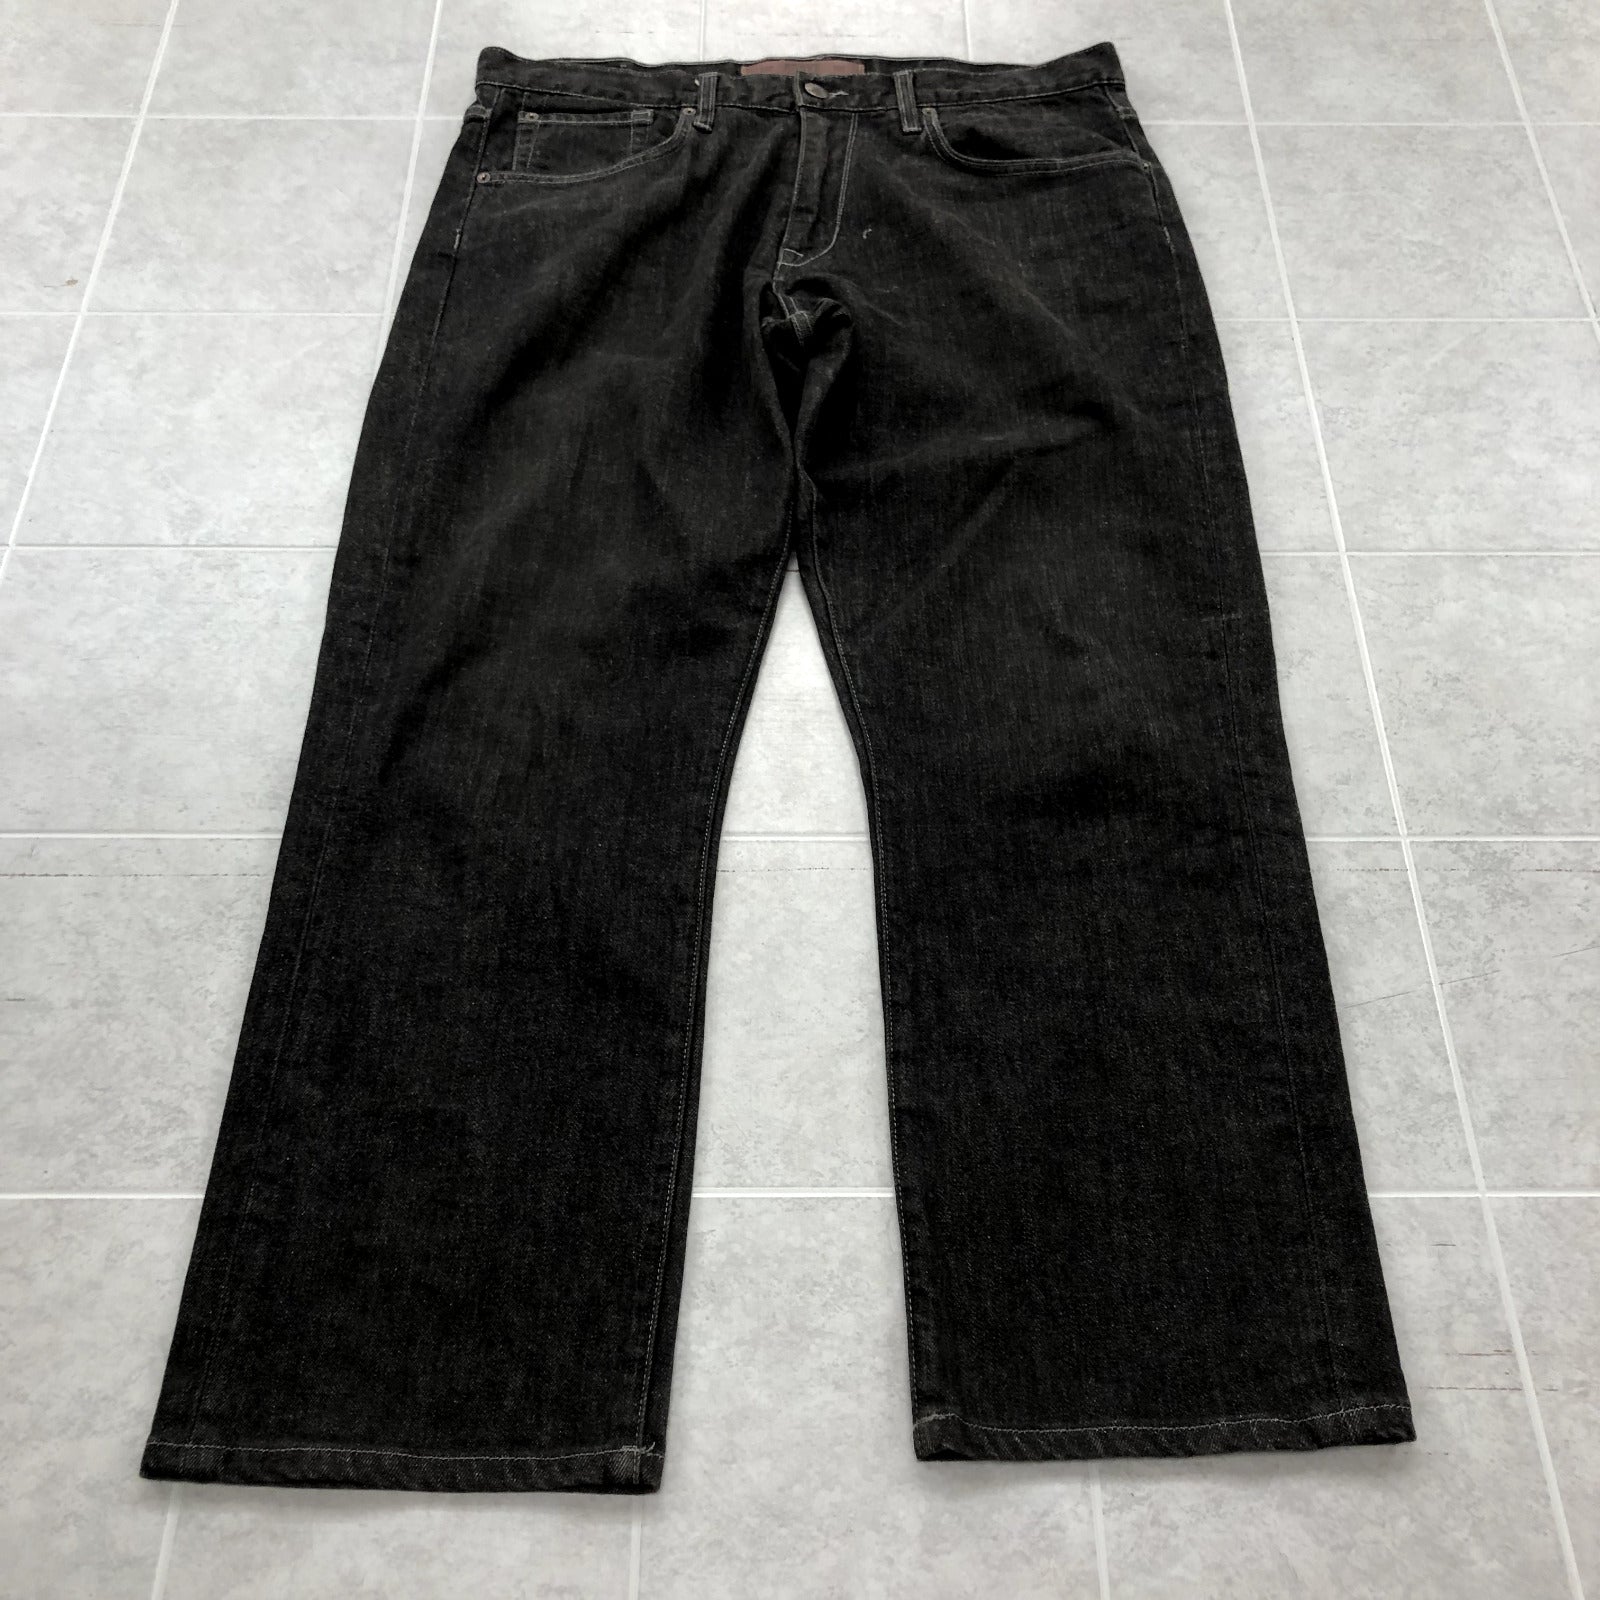 AGAVE Black Straight Legged High-Rise Flat Front Denim Jeans Adult Size 36